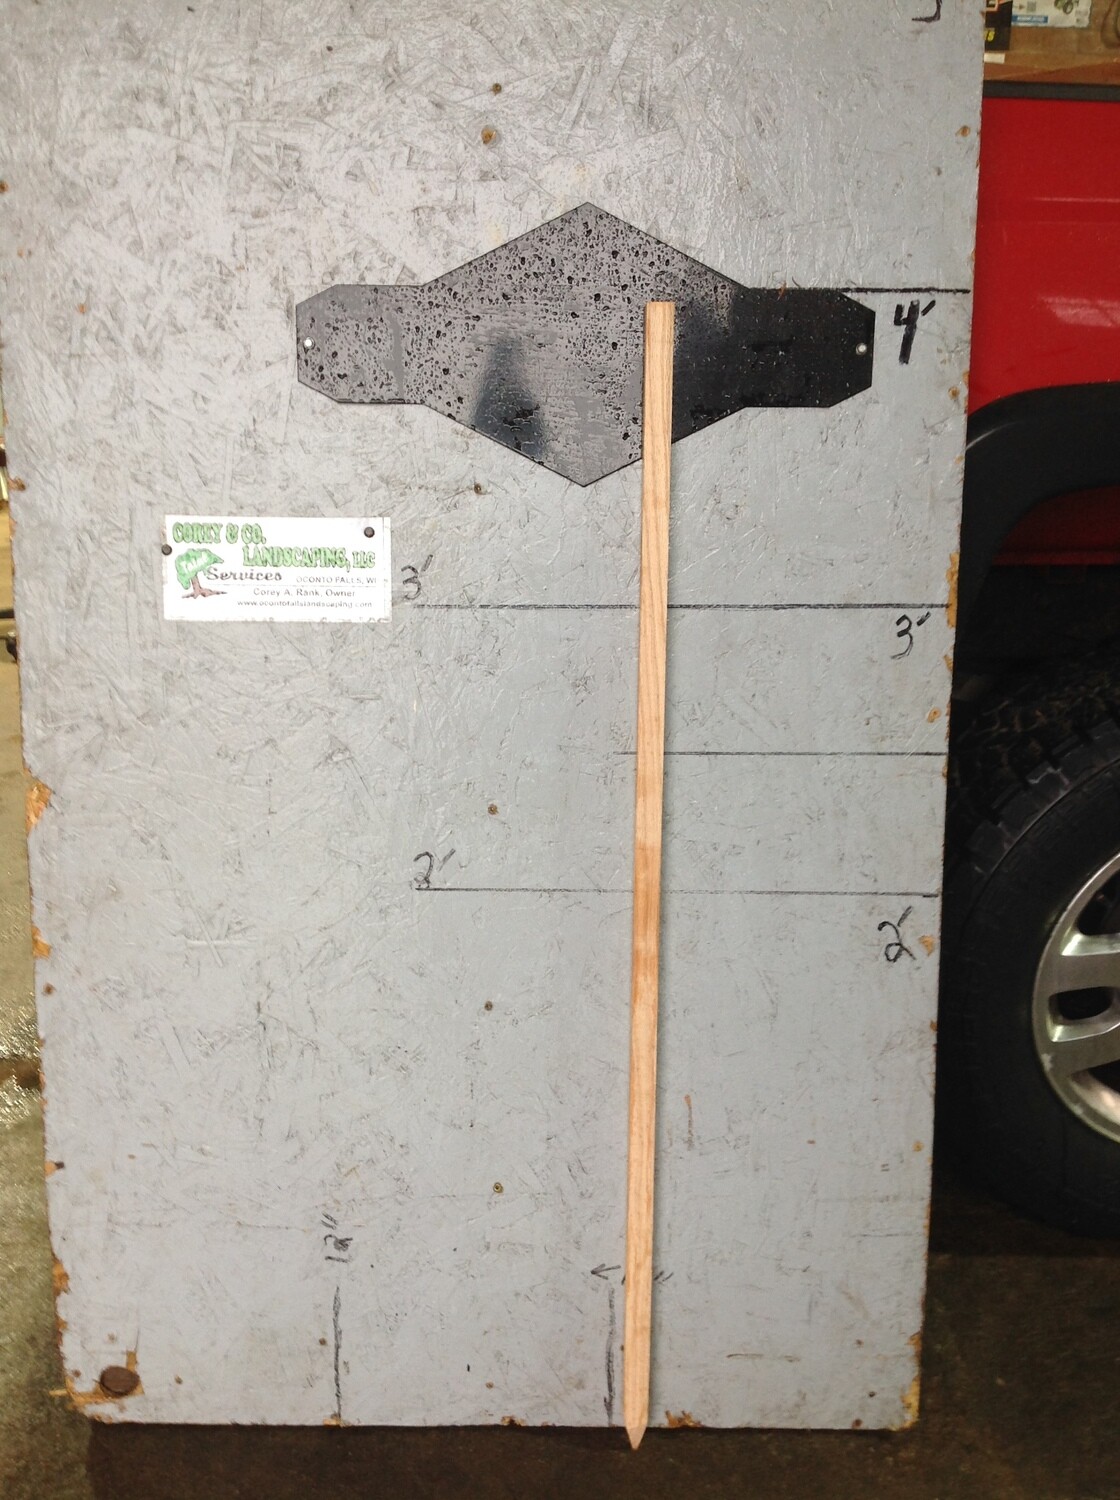 Wooden Stakes Hardwood - 4' - $1.00/each
LOCAL Pick-up ONLY